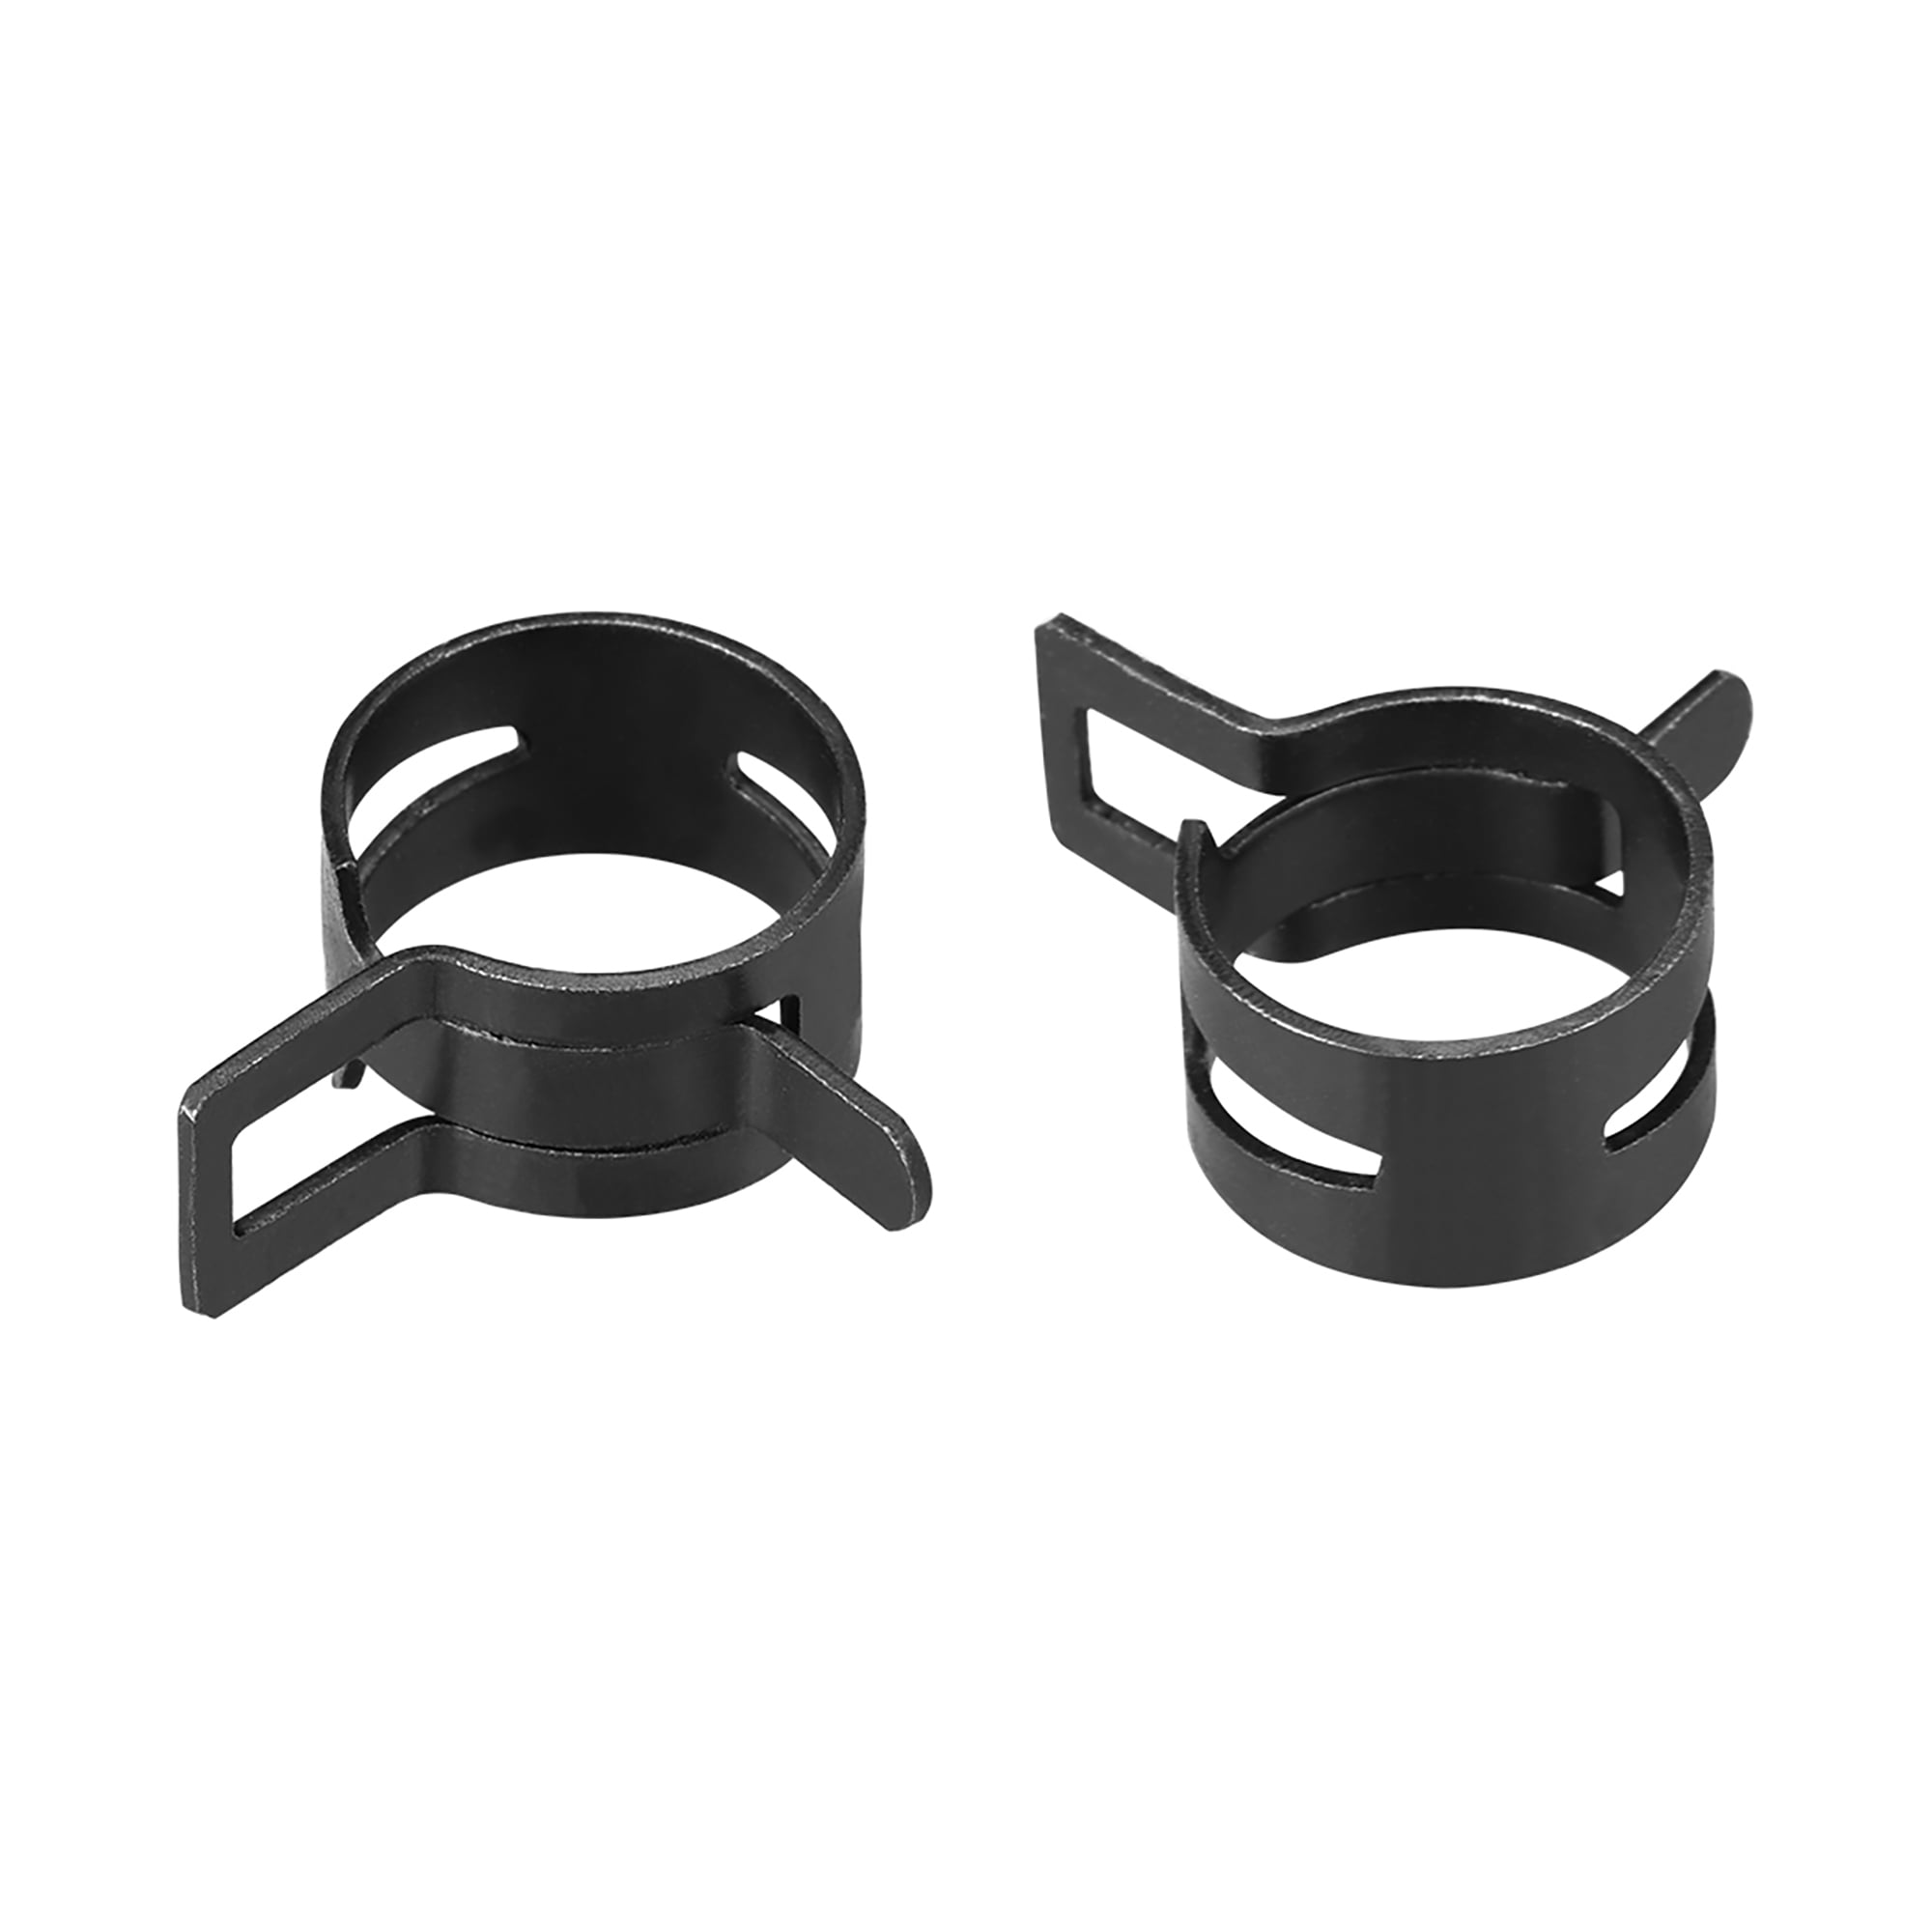 Steel Band Clamp 18mm Hose Tube Spring Clips Clamp Black Manganese Steel 10Pcs 